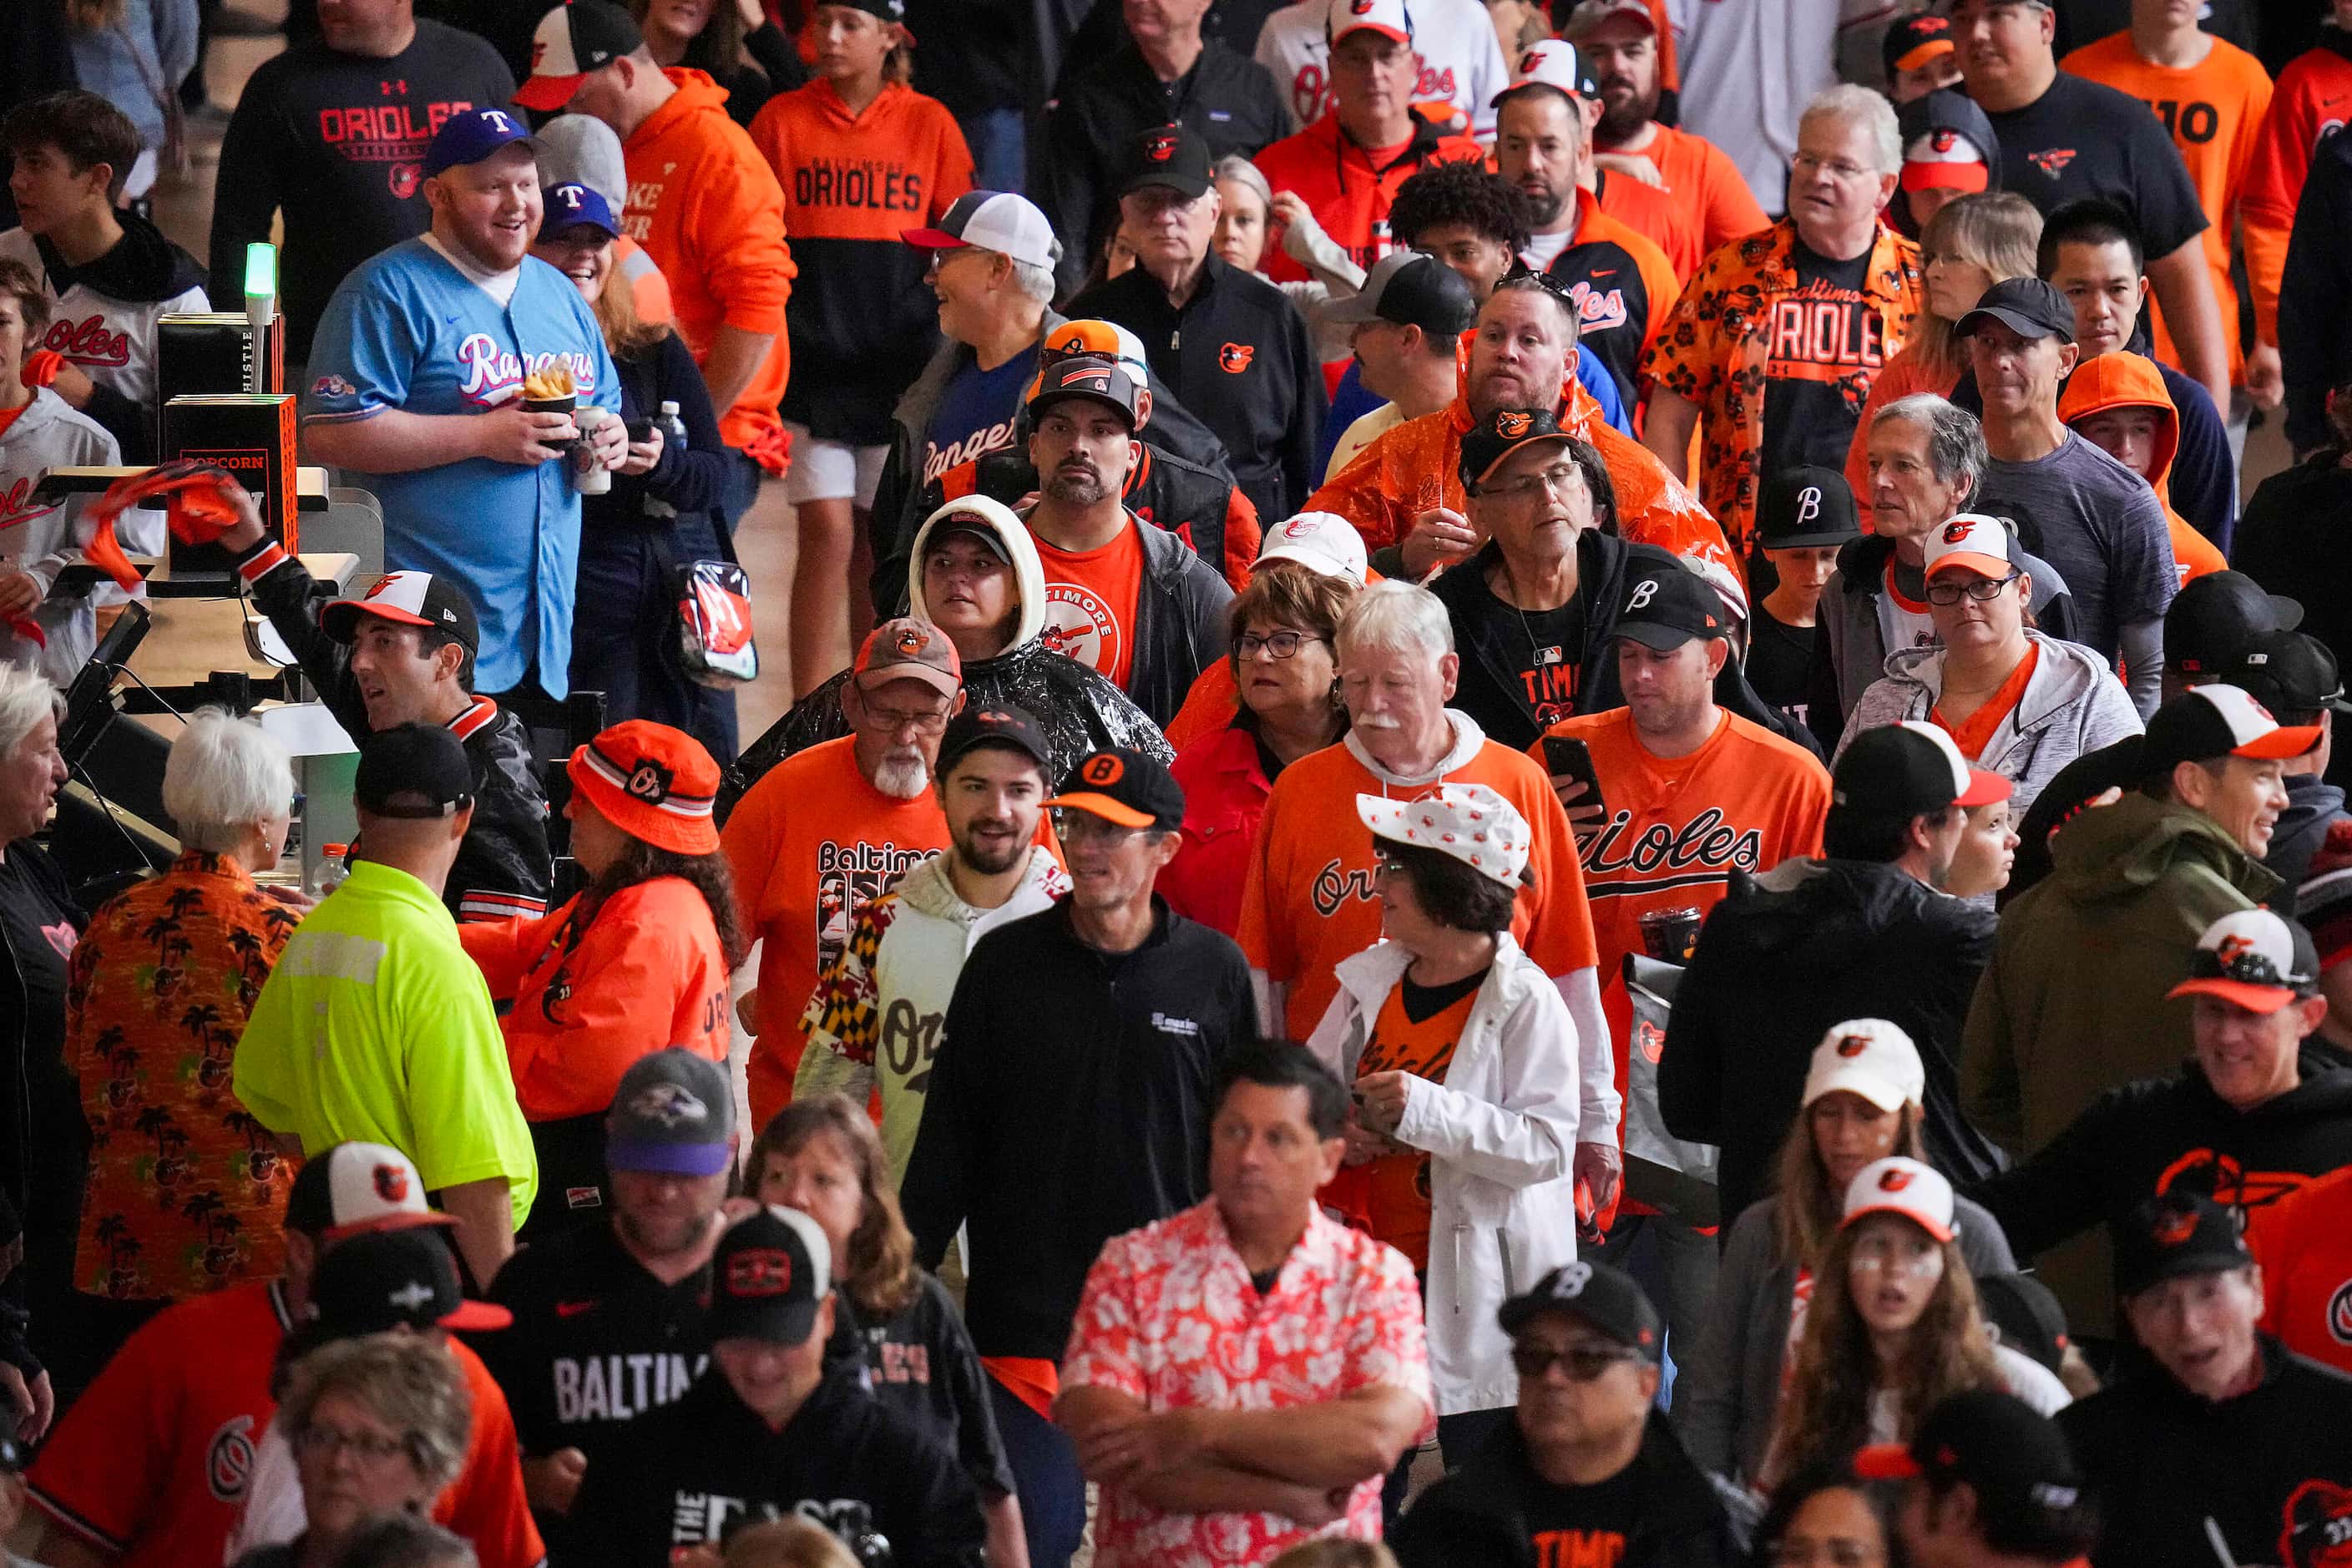 A pair of Texas Rangers fans looks out over a crowded concourse of Baltimore Orioles fans...